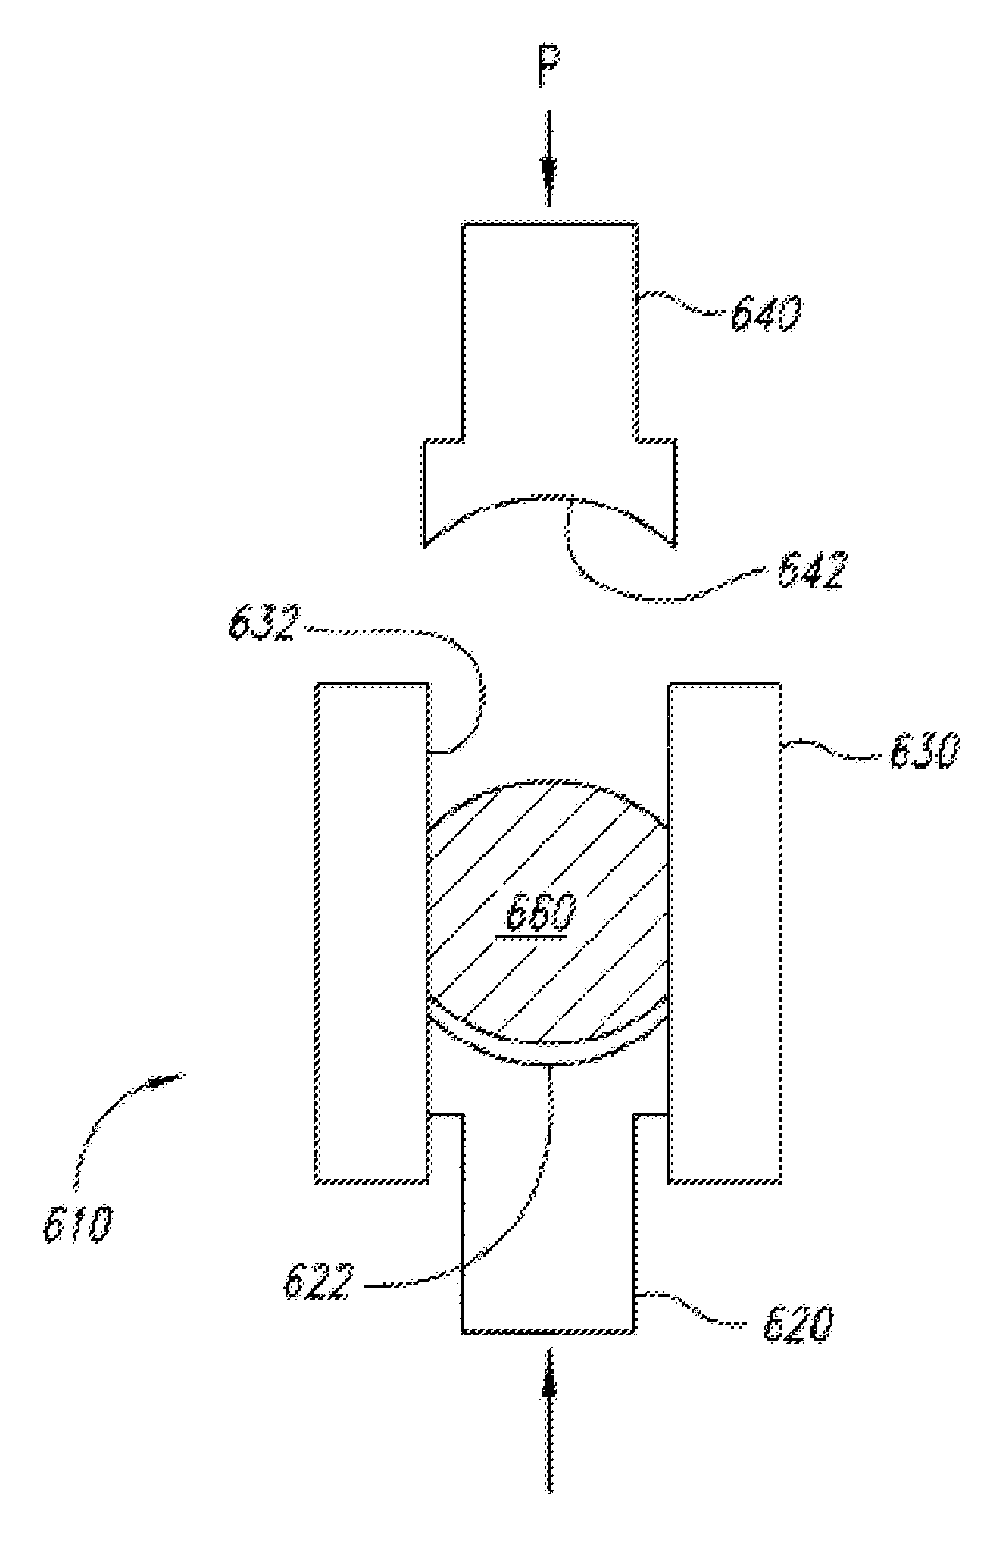 System and method for uniaxial compression of an article, such as a three dimensionally printed dosage form